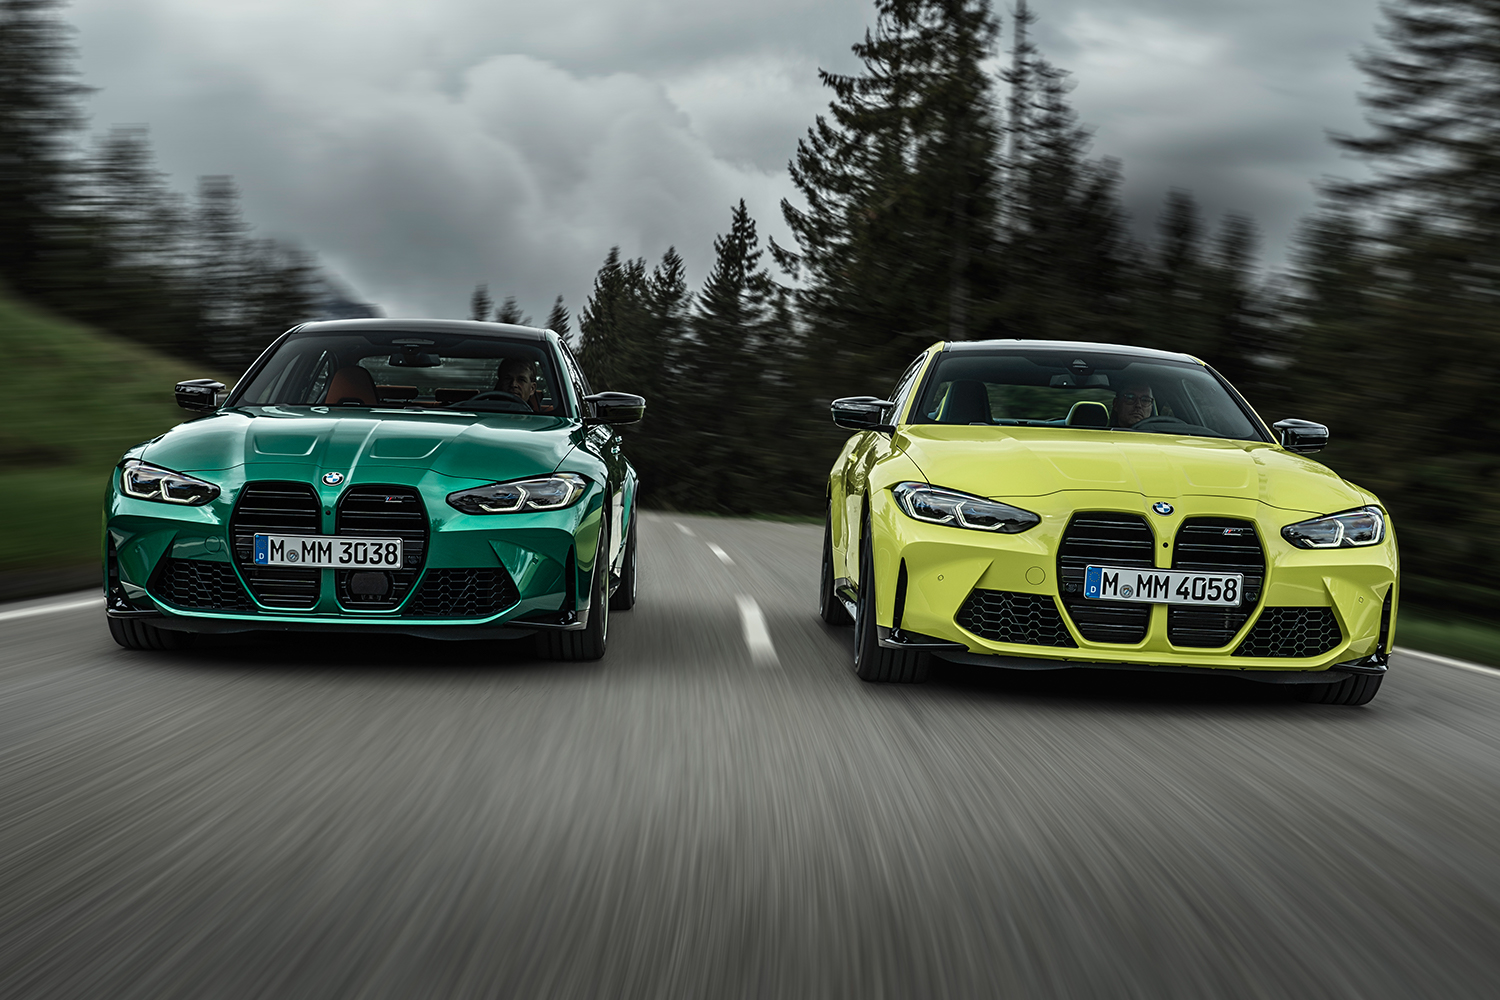 A green 2021 BMW M3 Competition Sedan on the left driving fast next to a 2021 BMW M4 Competition Coupe in yellow on the right with trees looming in the background